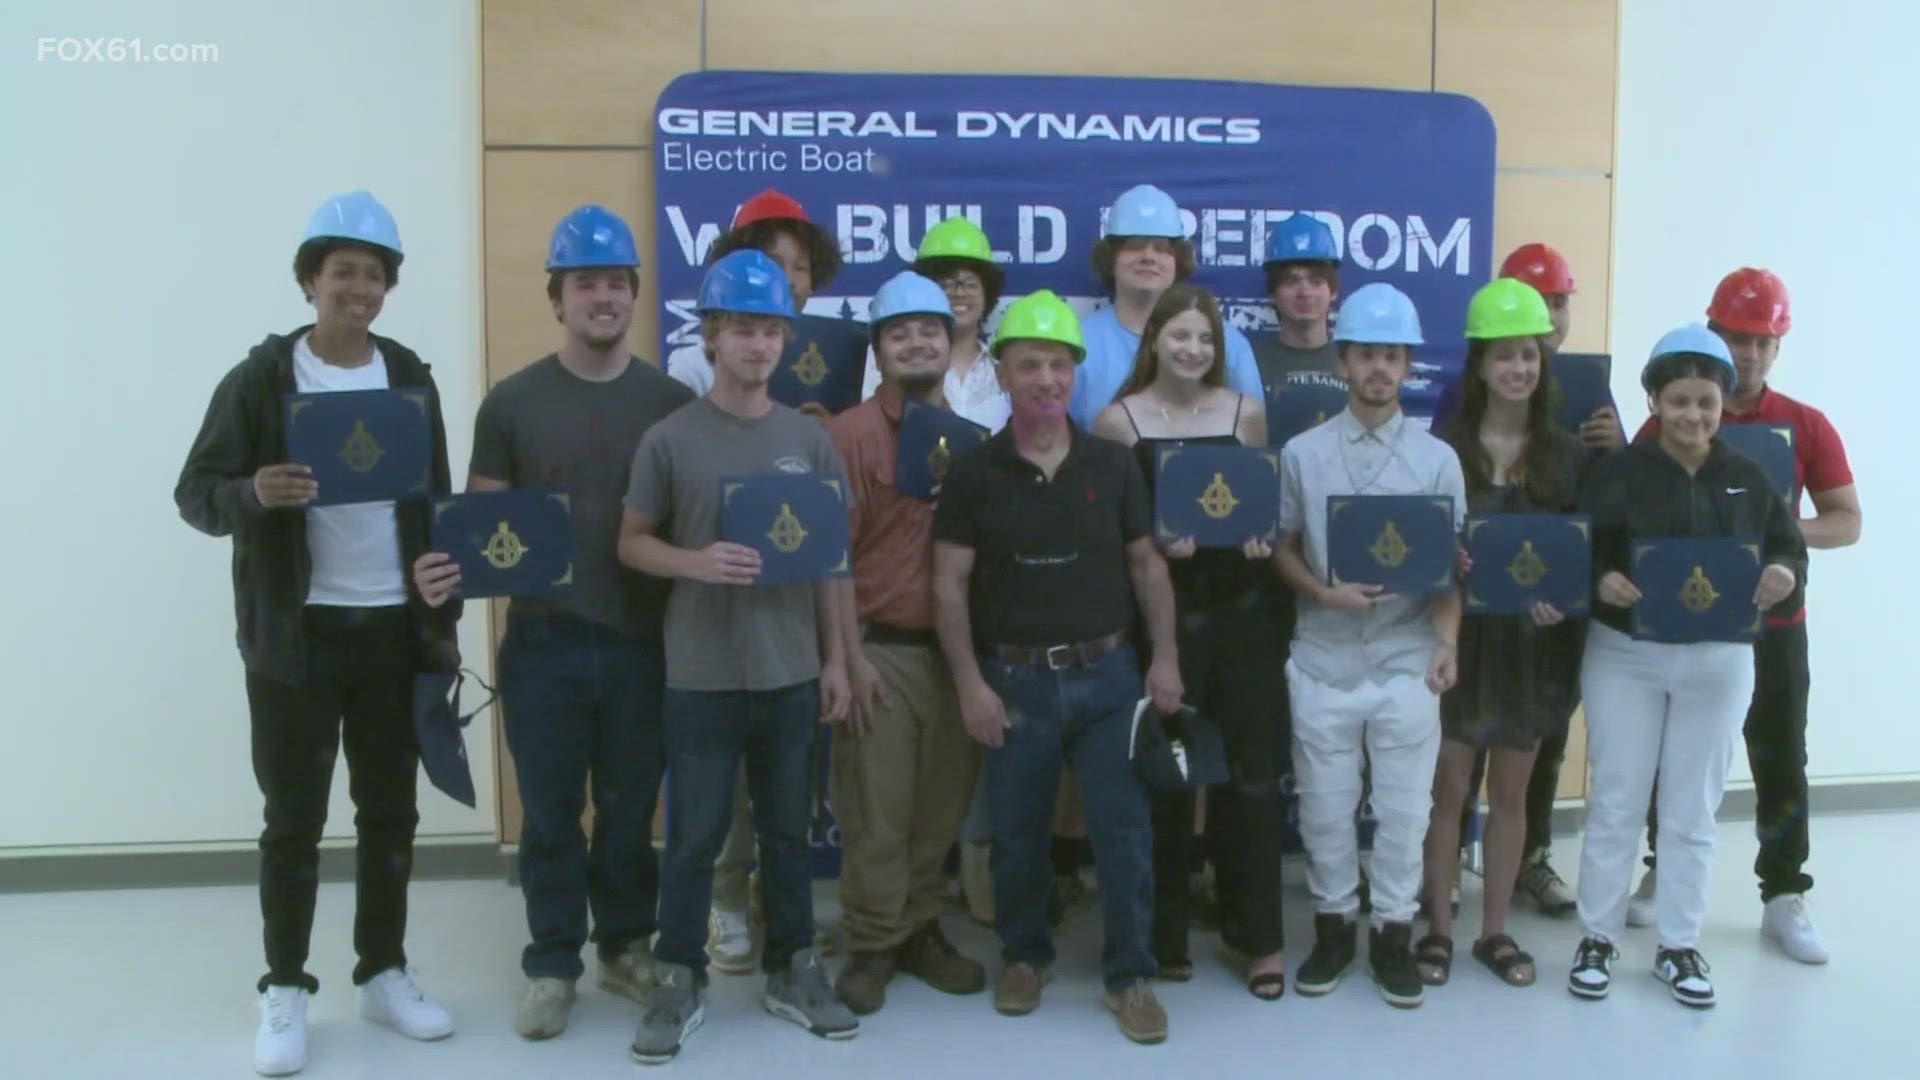 General Dynamics Electric Boats will be employing these young adults in their operation after graduation.